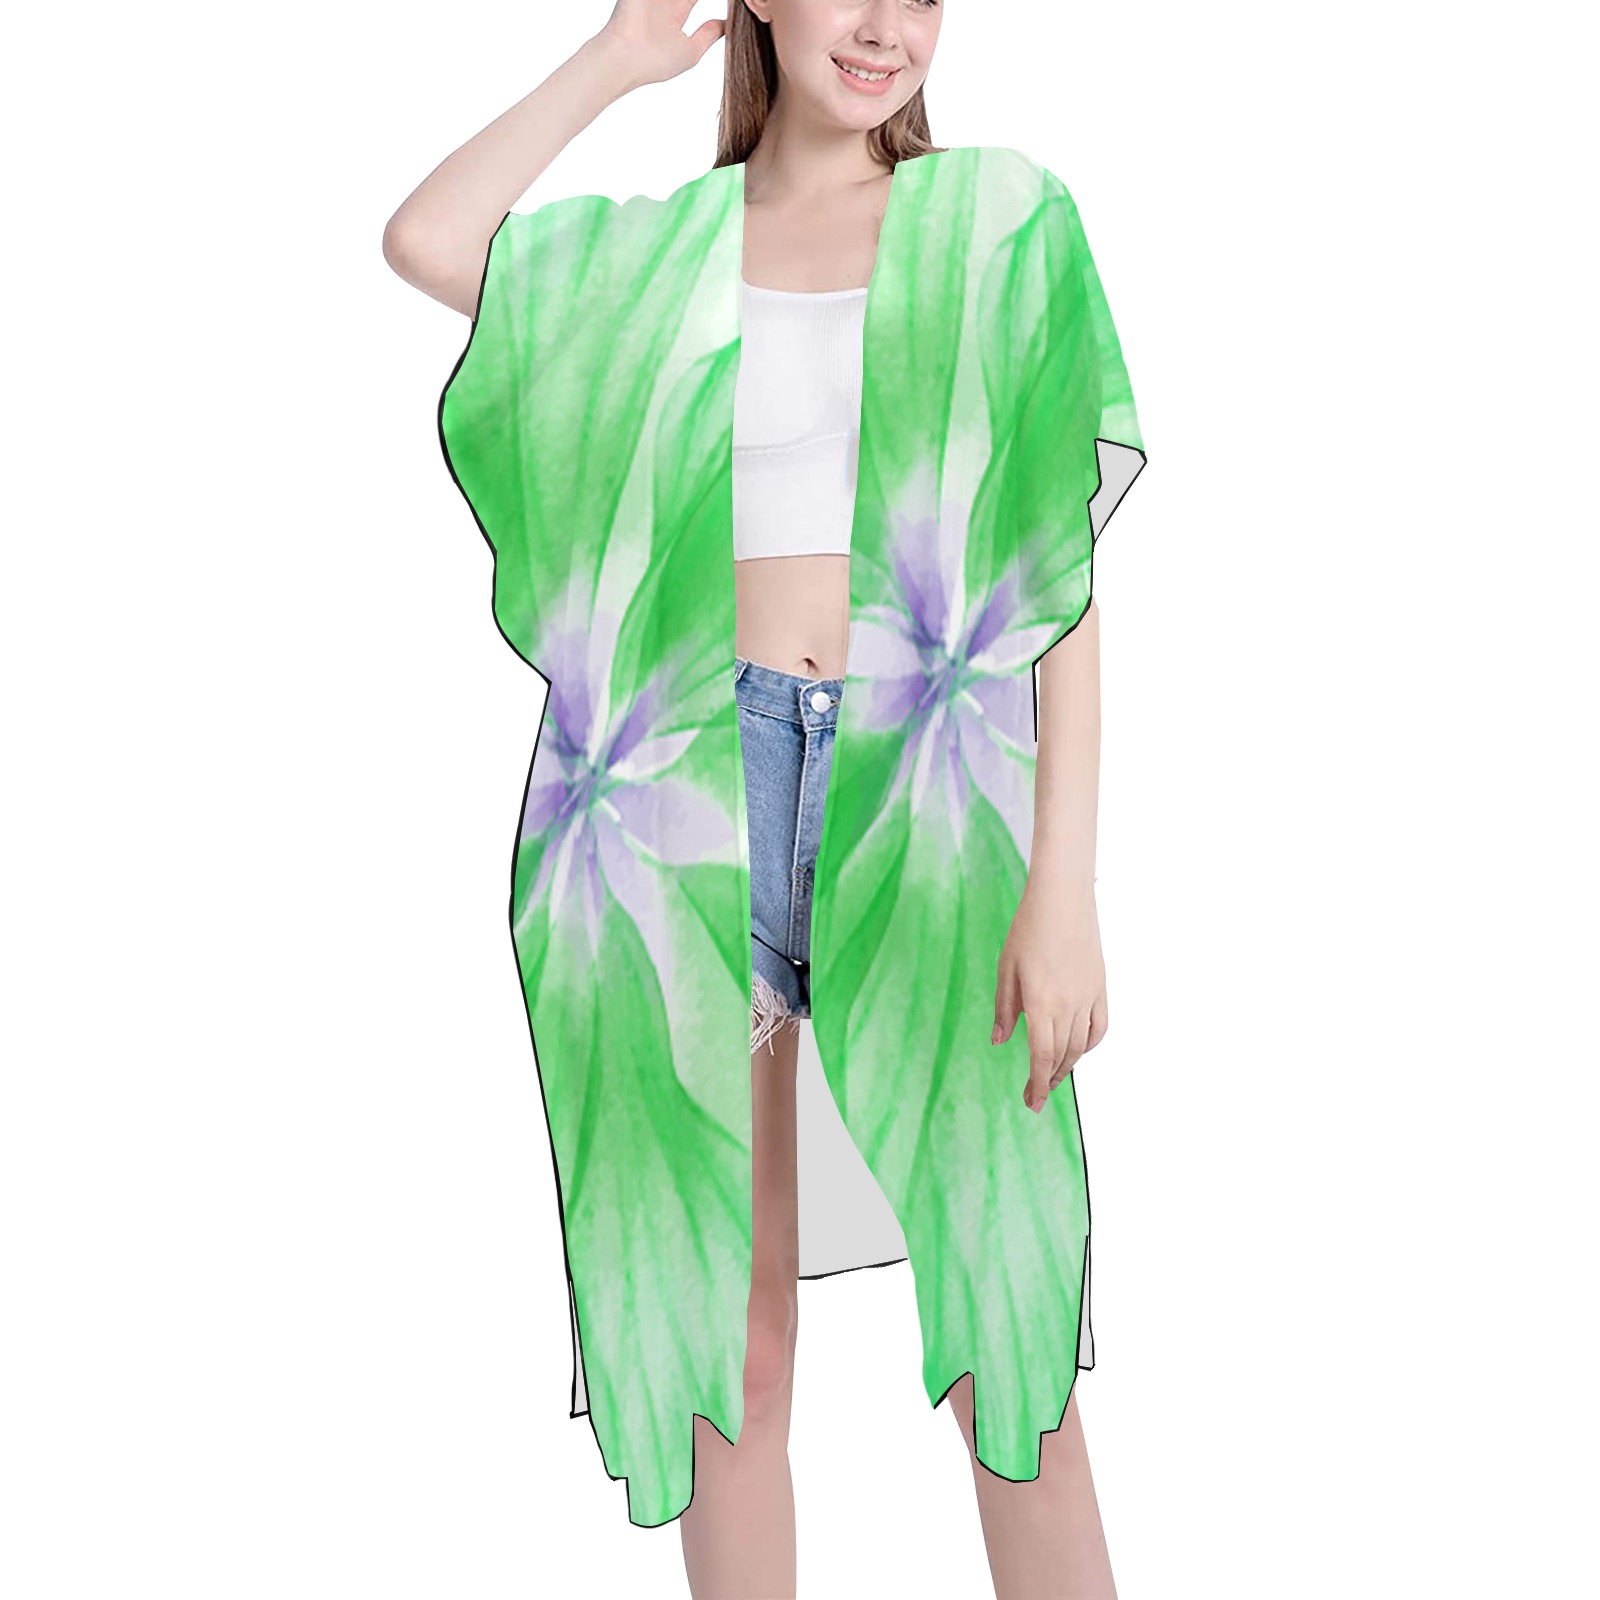 Cover Up for Her Mid-Length Side Slits Chiffon Cover Ups (Model H50)